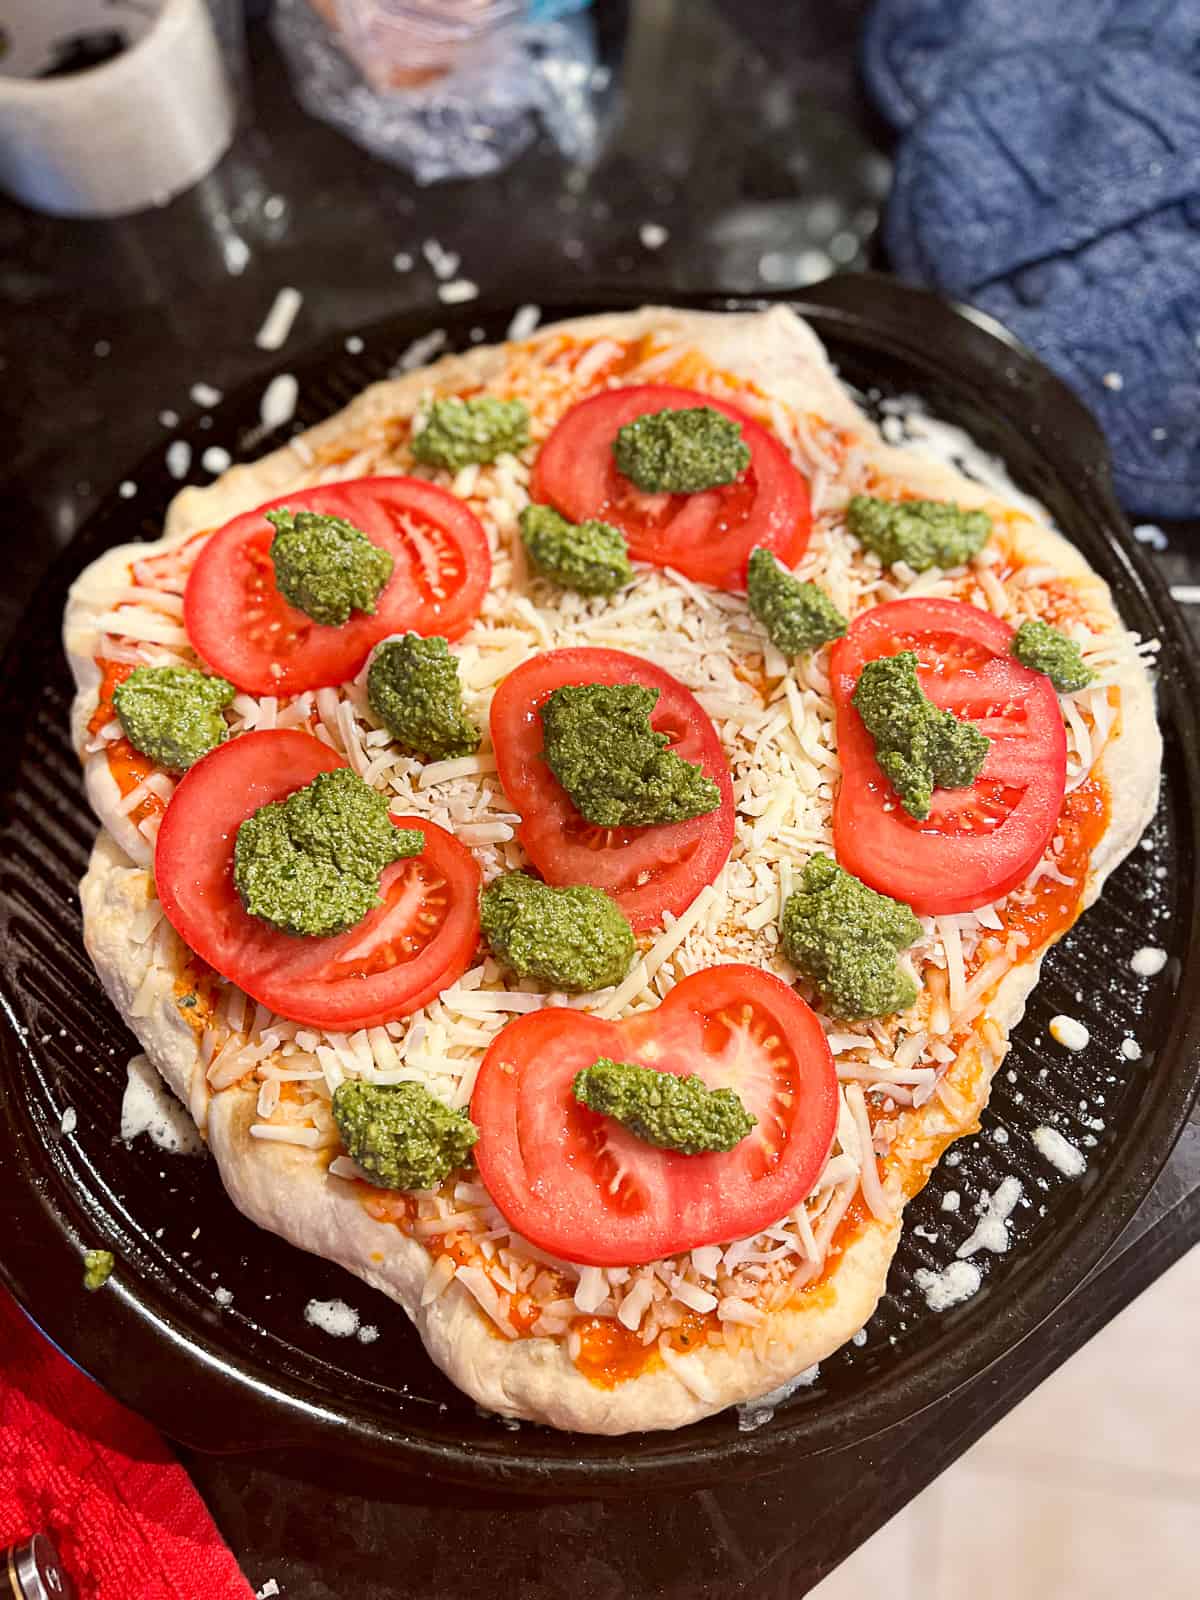 Raw ingredients including pesto and tomatoes on pizza dough